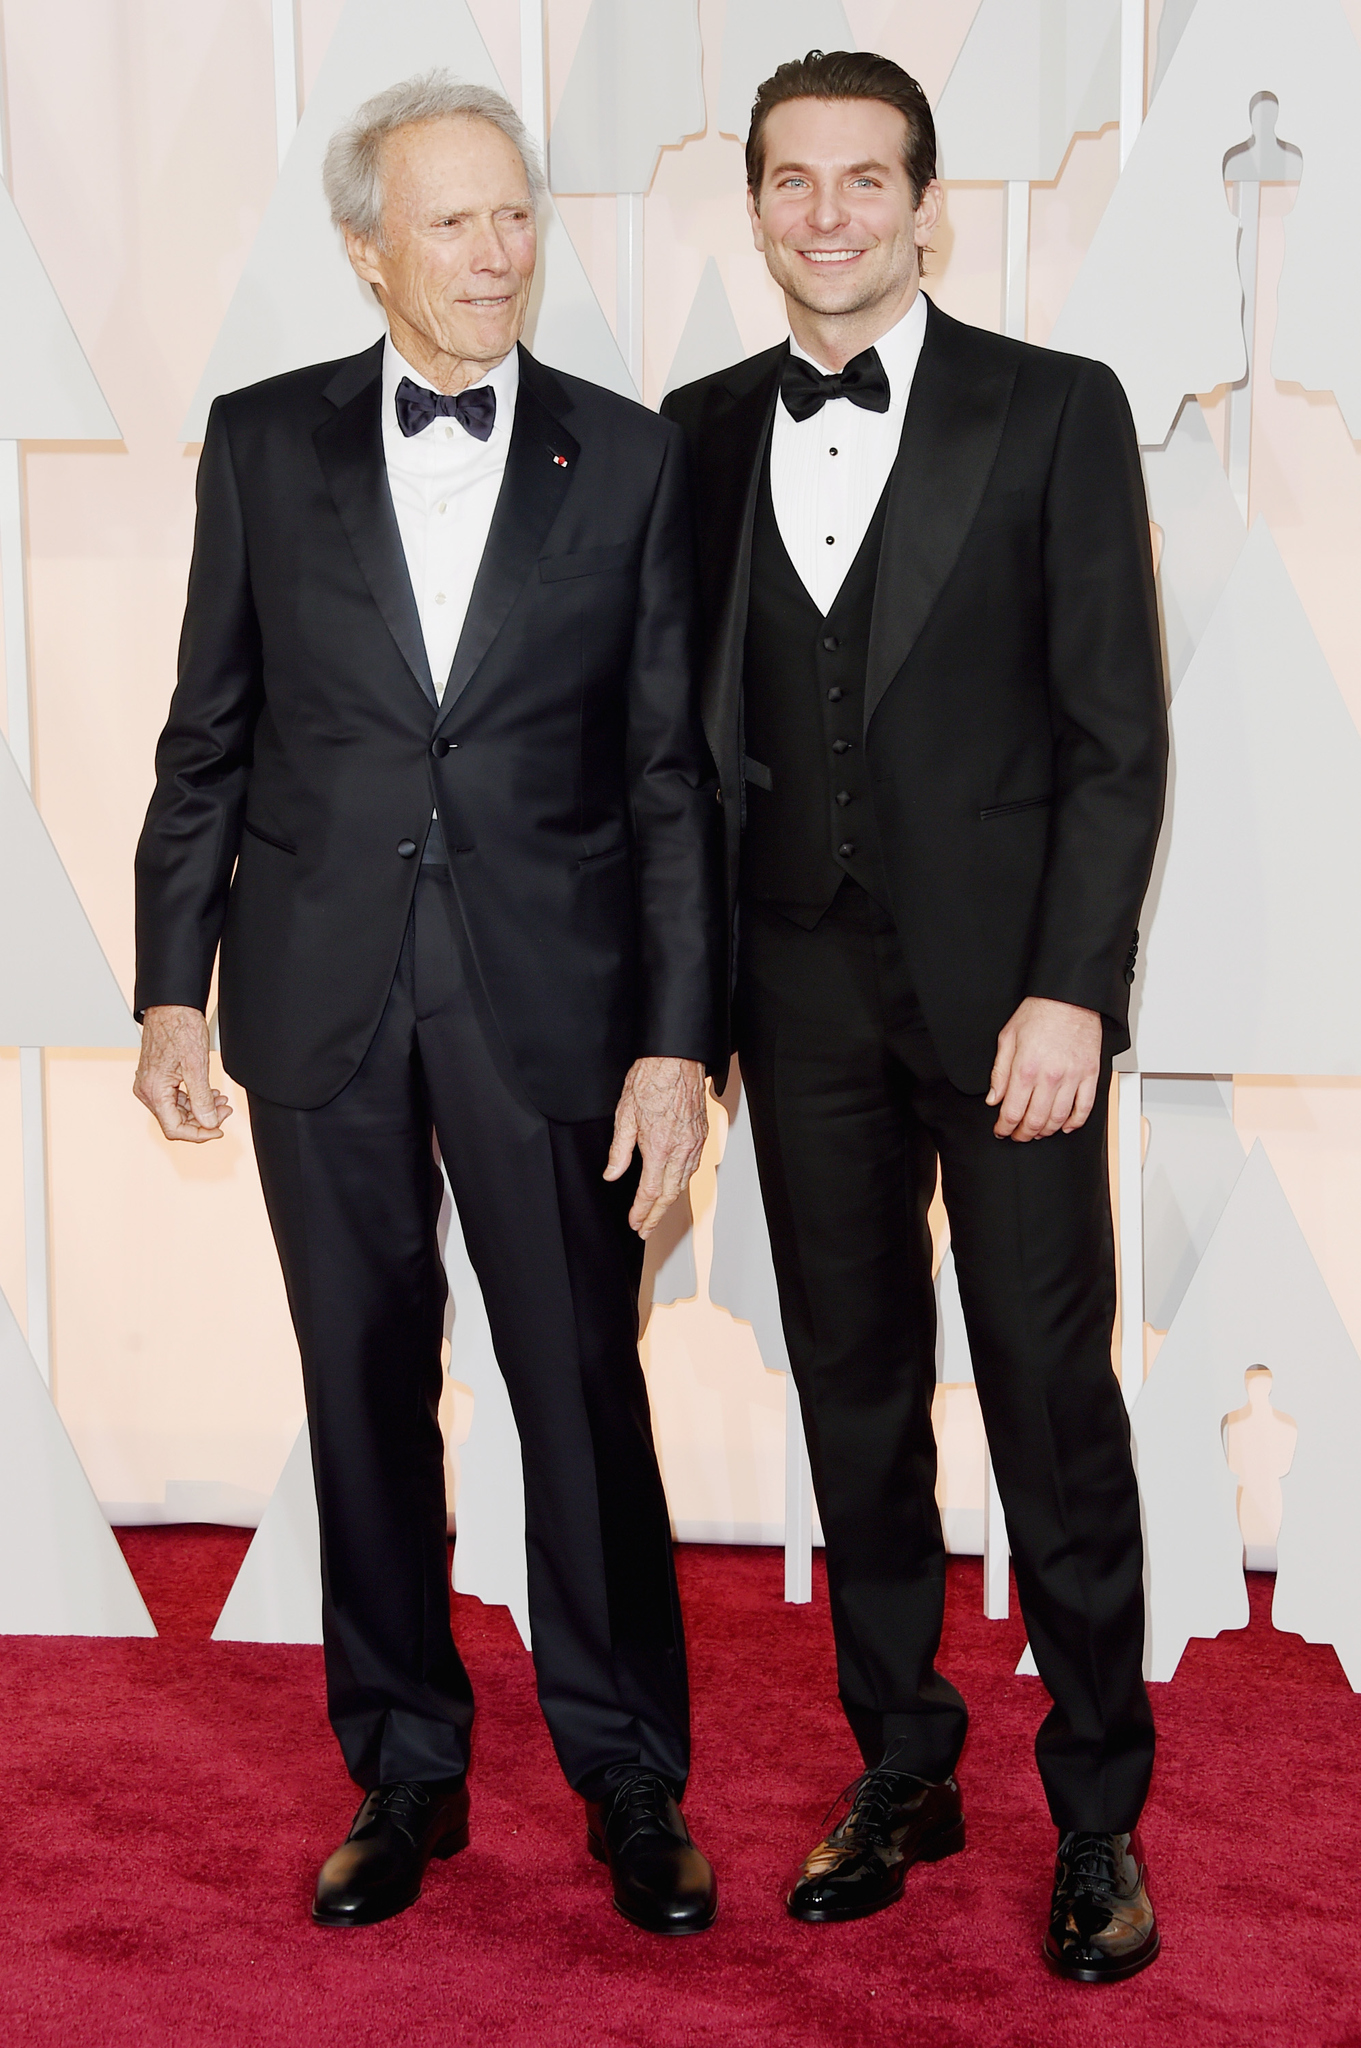 Clint Eastwood and Bradley Cooper at event of The Oscars (2015)